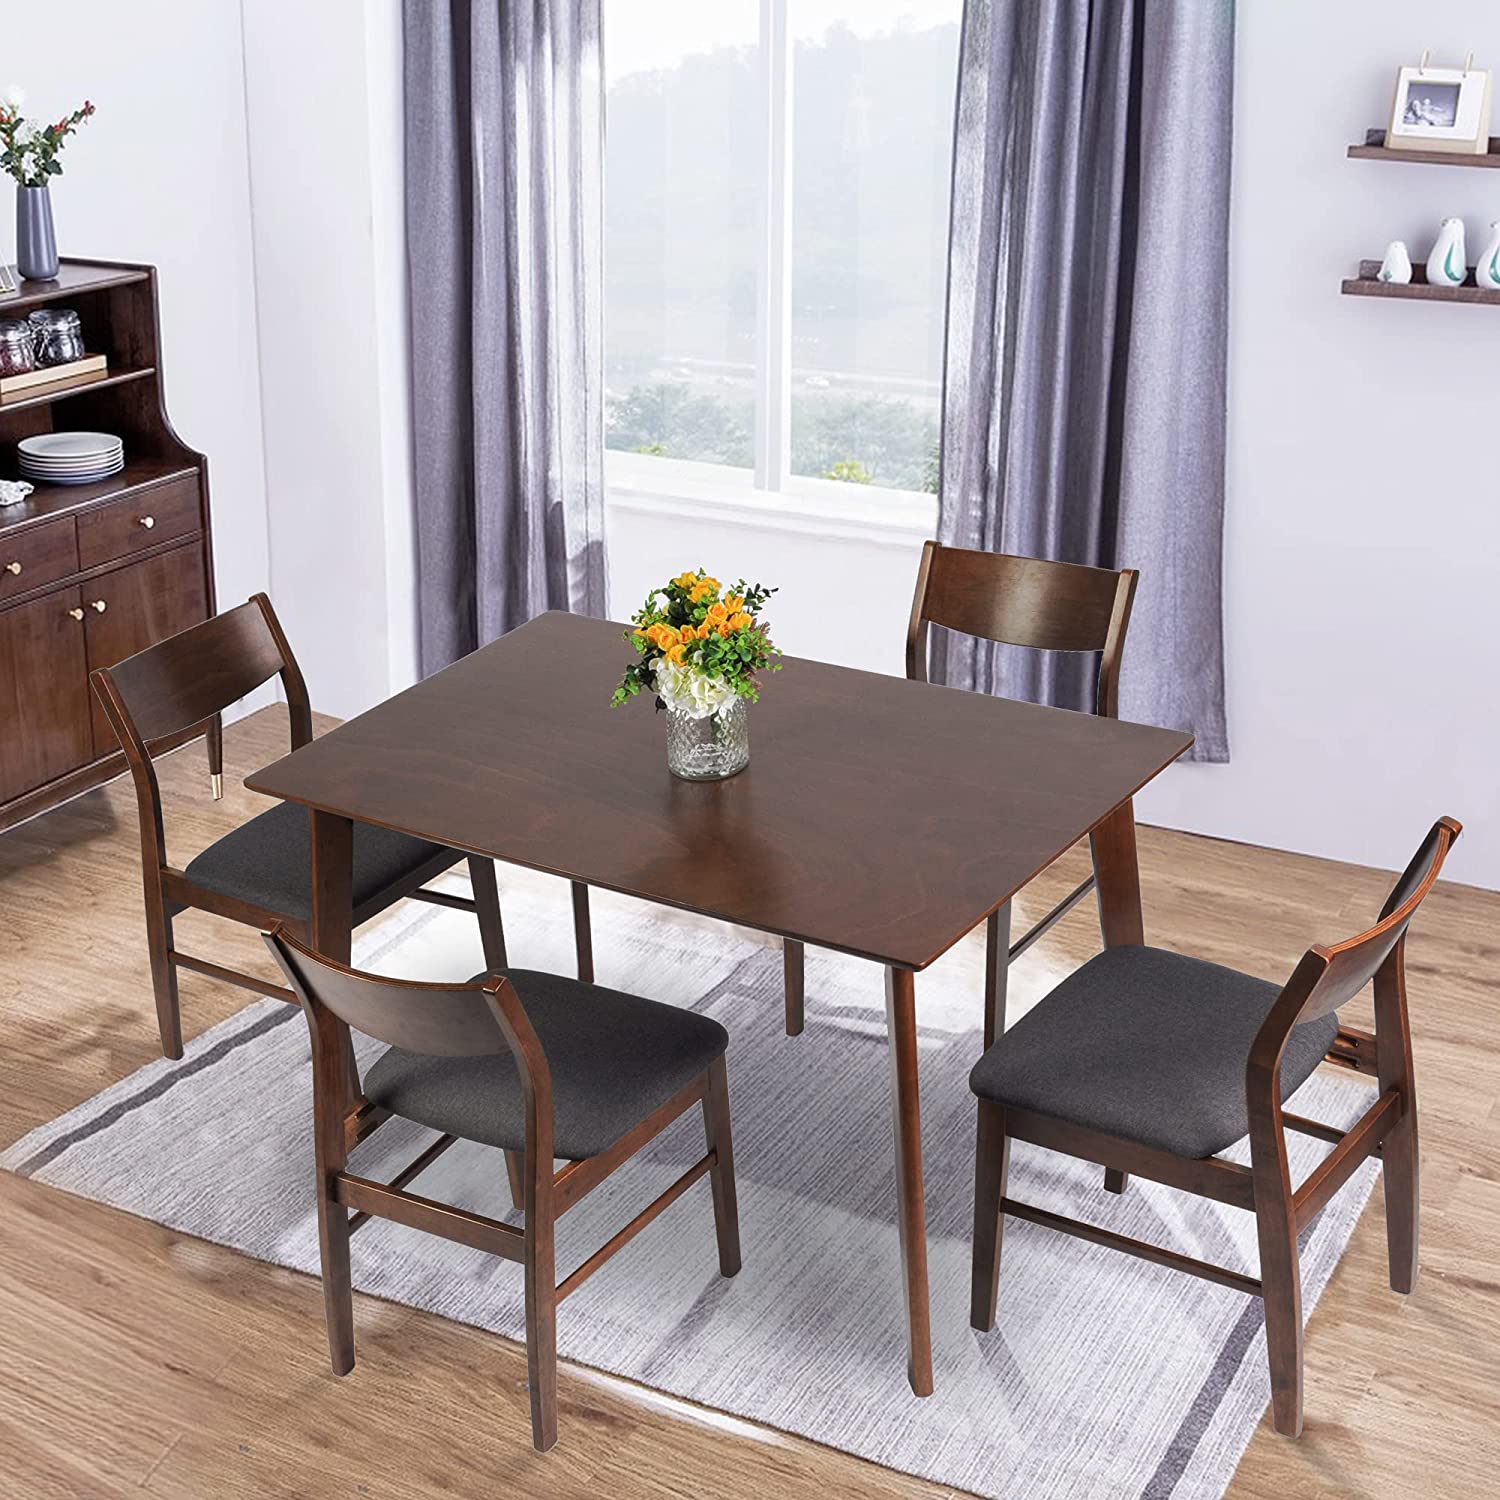 5 Piece Wooden Dining Room Table Set Mid Century Modern Wood Dinette Set Kitchen Table and 4 Chairs with Cushion, Walnut